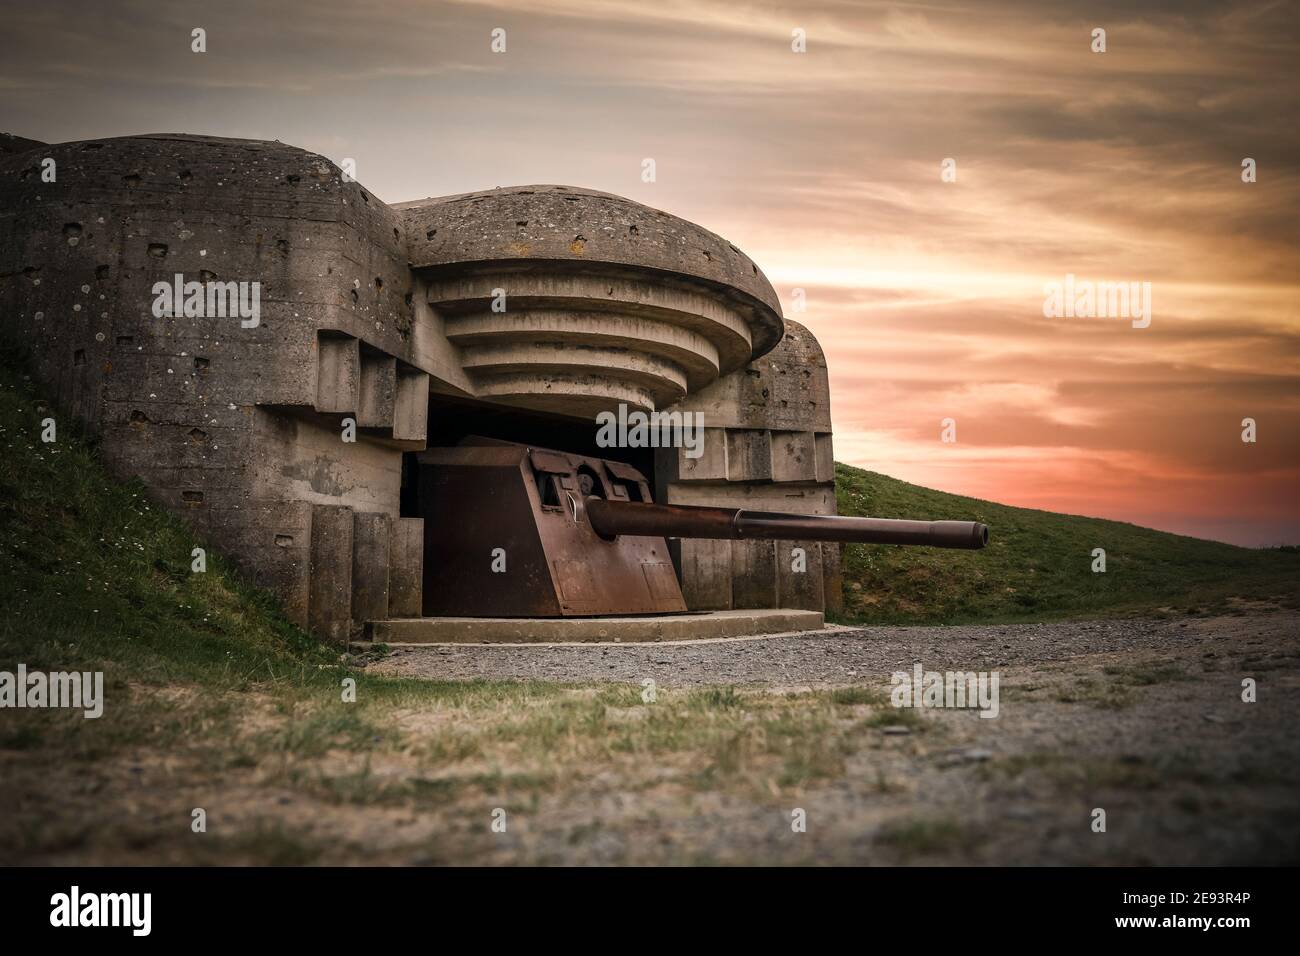 Atlantic wall concrete German World War Two 2 gun emplacement fortification bunker battery at Longues-sur-mer in Normandy Gold Beach France remains Stock Photo